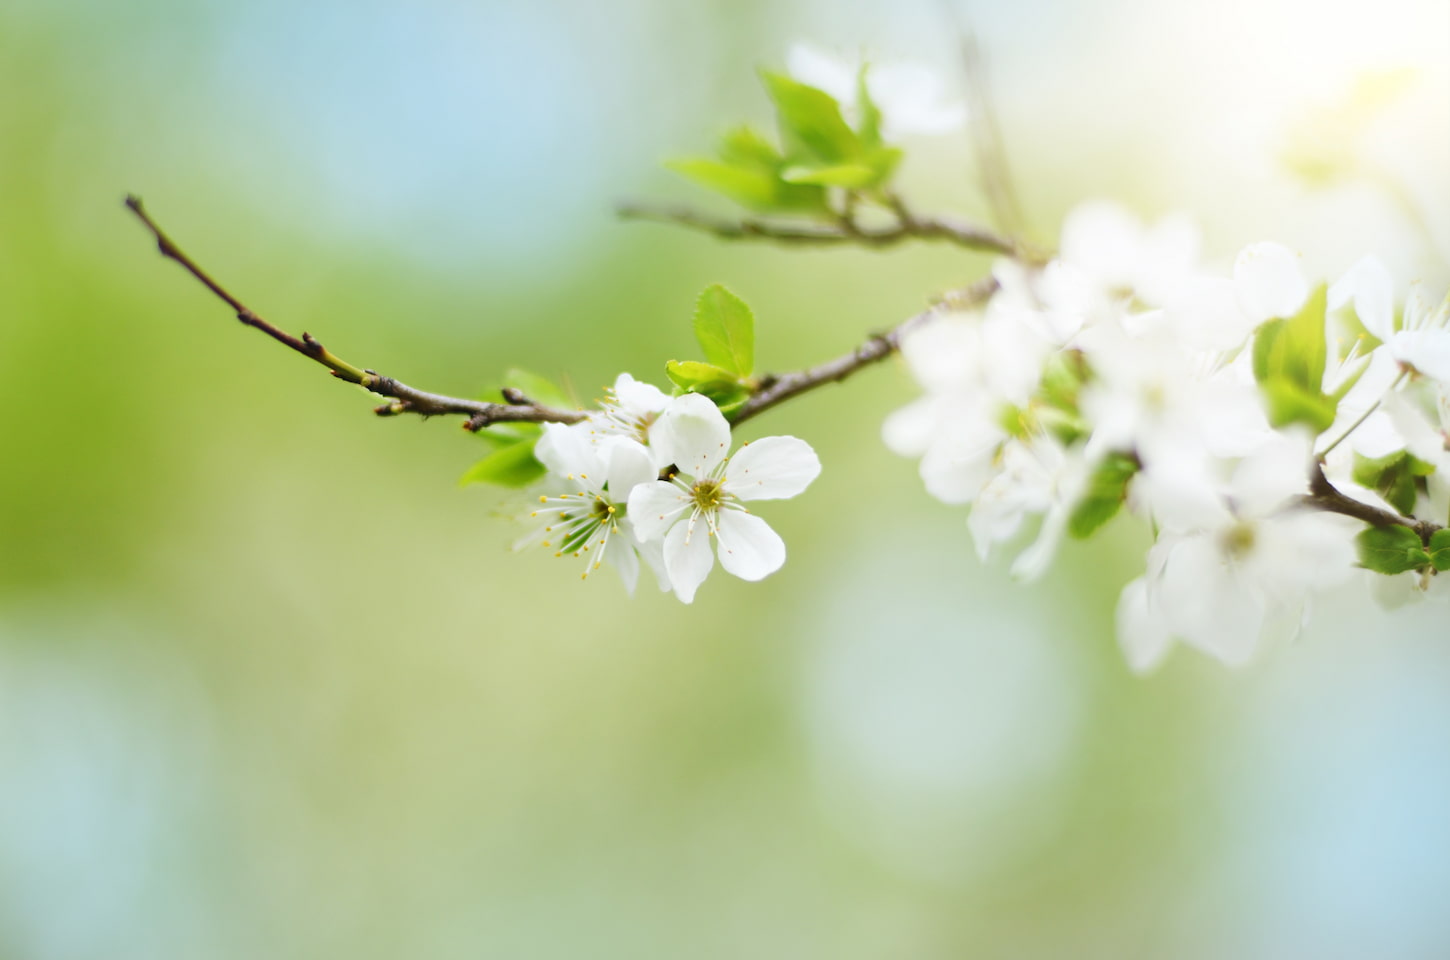 How To Keep Fruit Trees From Blooming Too Early